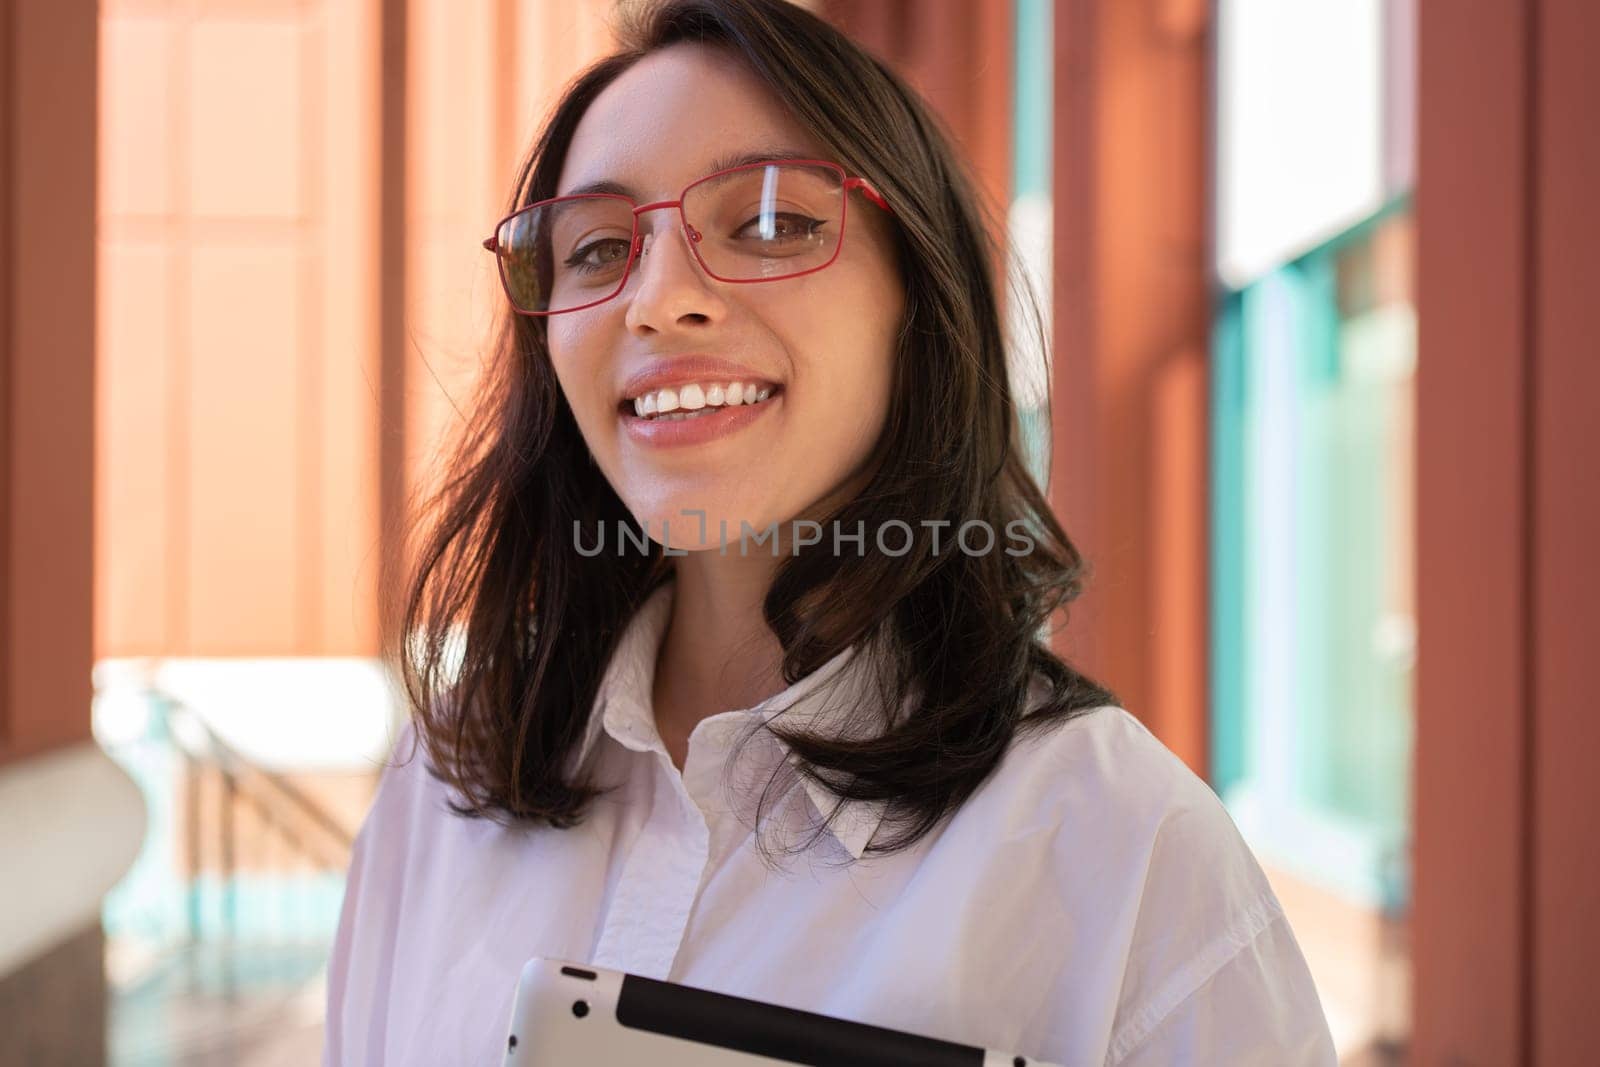 Businesswoman in glasses looking at camera, smiling and holding digital tablet, standing outdoor. Female freelancer holding tablet while walk outside close up portrait